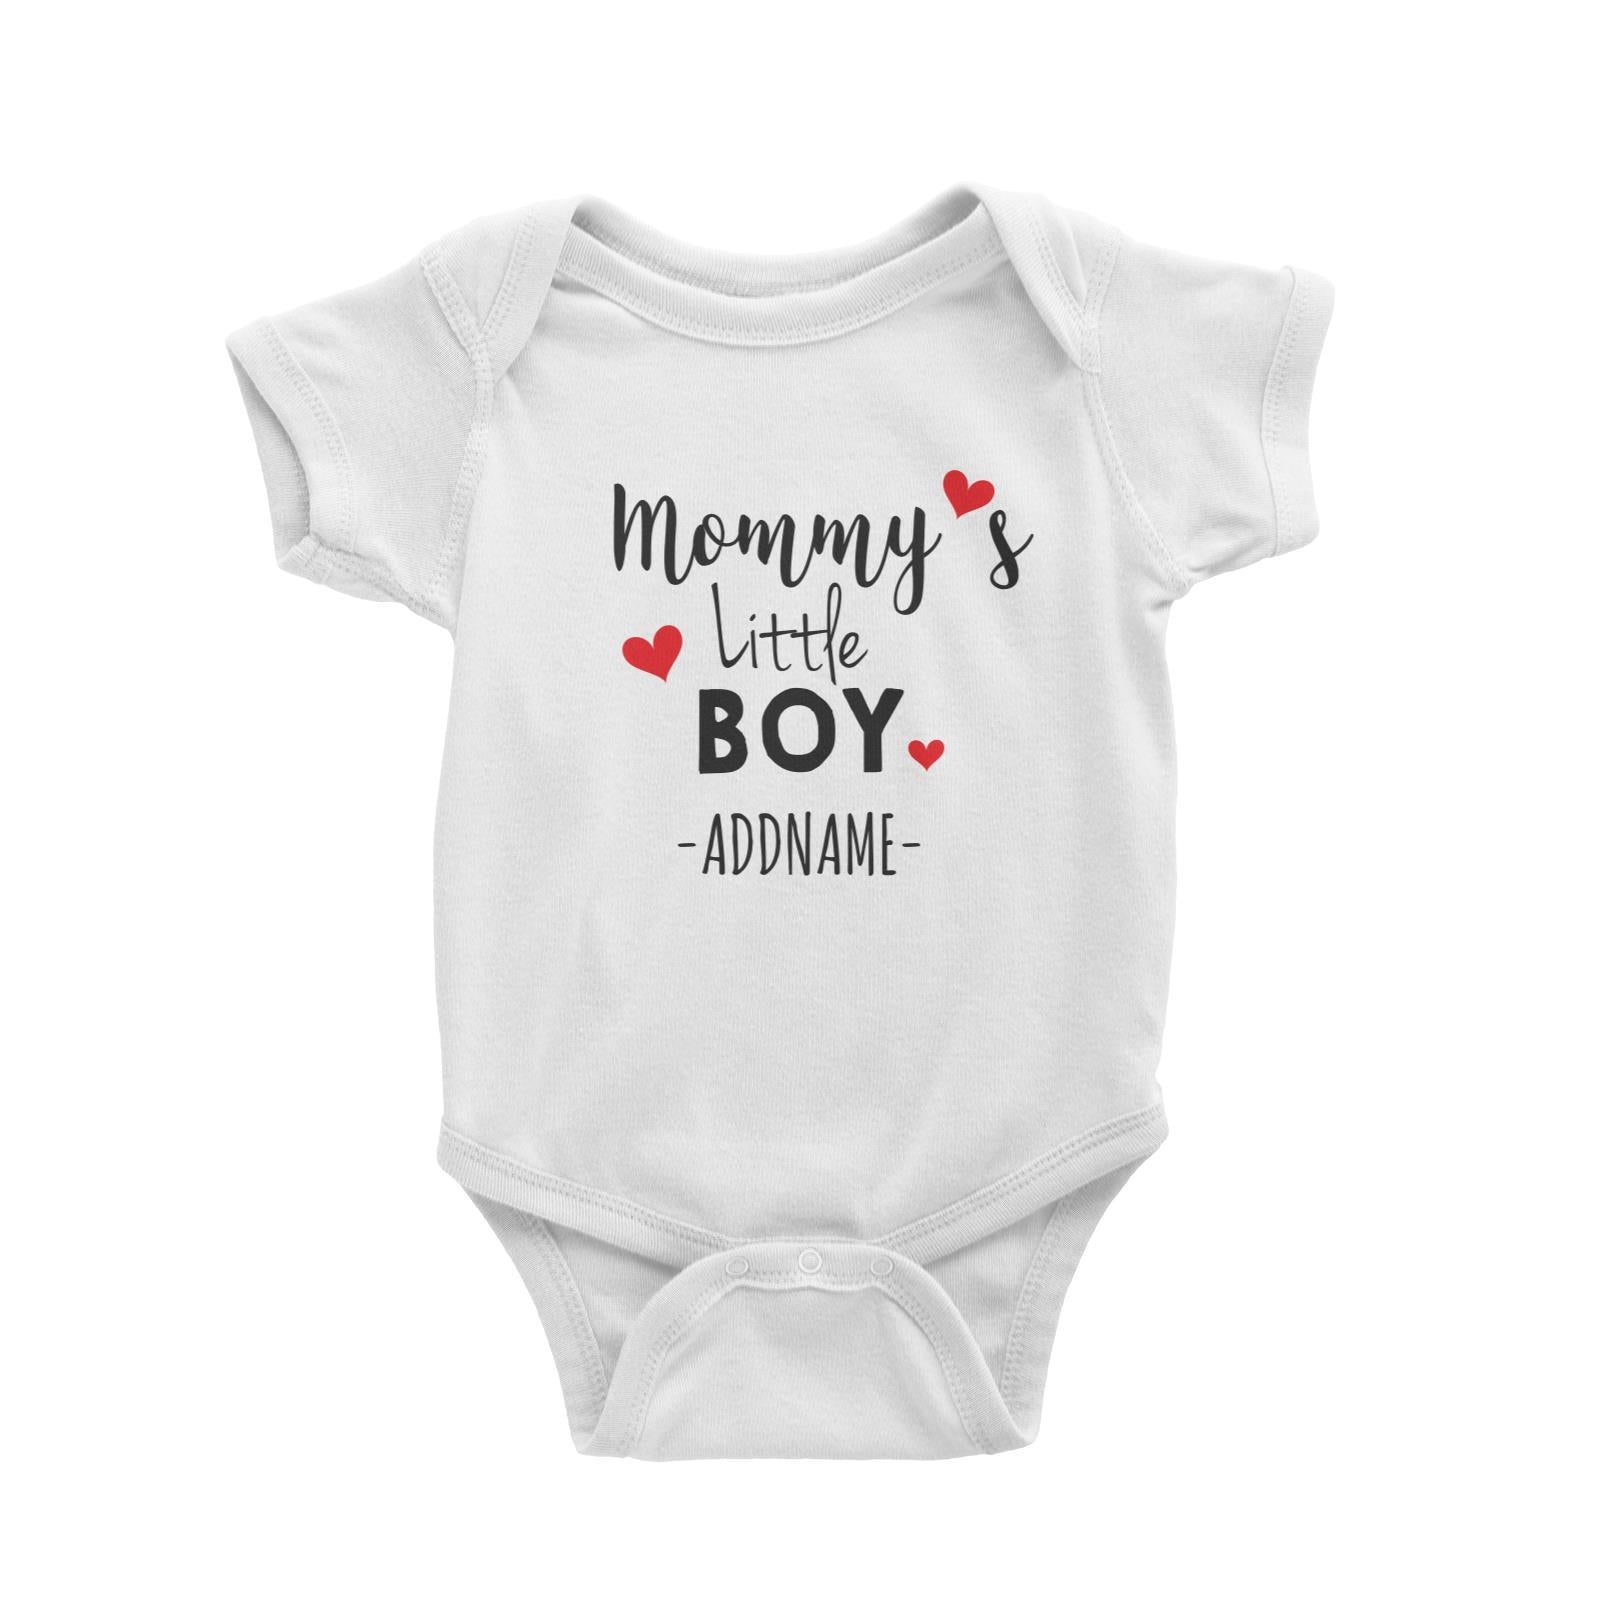 Mommy's Little Boy Addname Baby Romper Personalizable Designs Basic Newborn